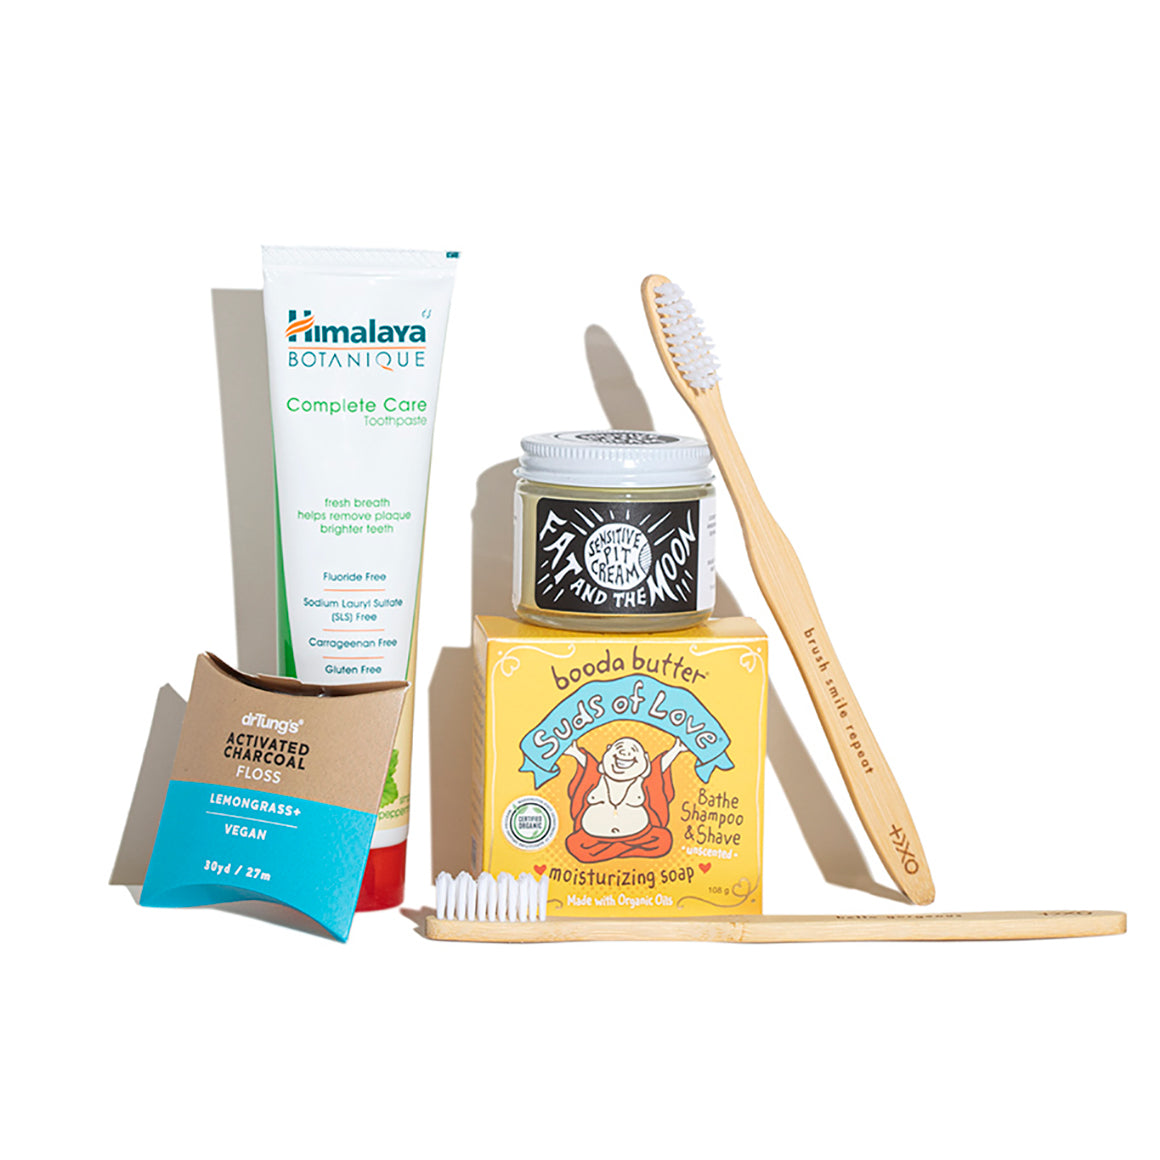 Products included in the Natural Toiletries Kit